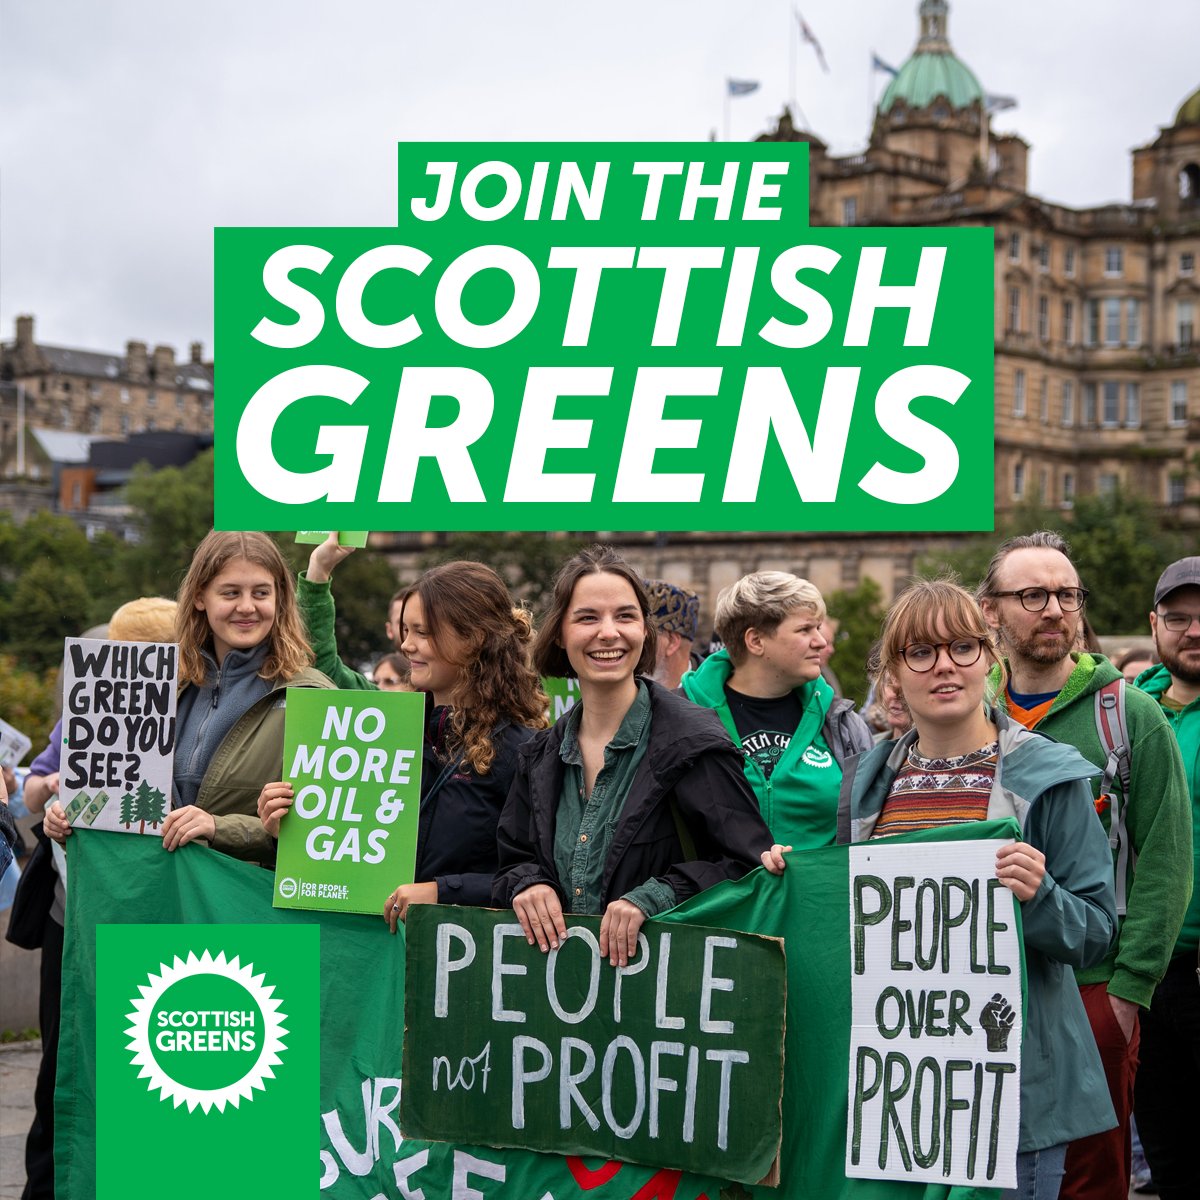 🏴󠁧󠁢󠁳󠁣󠁴󠁿🏳️‍🌈🏳️‍⚧️Only the Scottish Greens will campaign for a fairer, greener, and more equal Scotland. ➡️We are the only party advocating for a progressive, independent Scotland that puts people and planet first. 💚Join us today. greens.scot/join